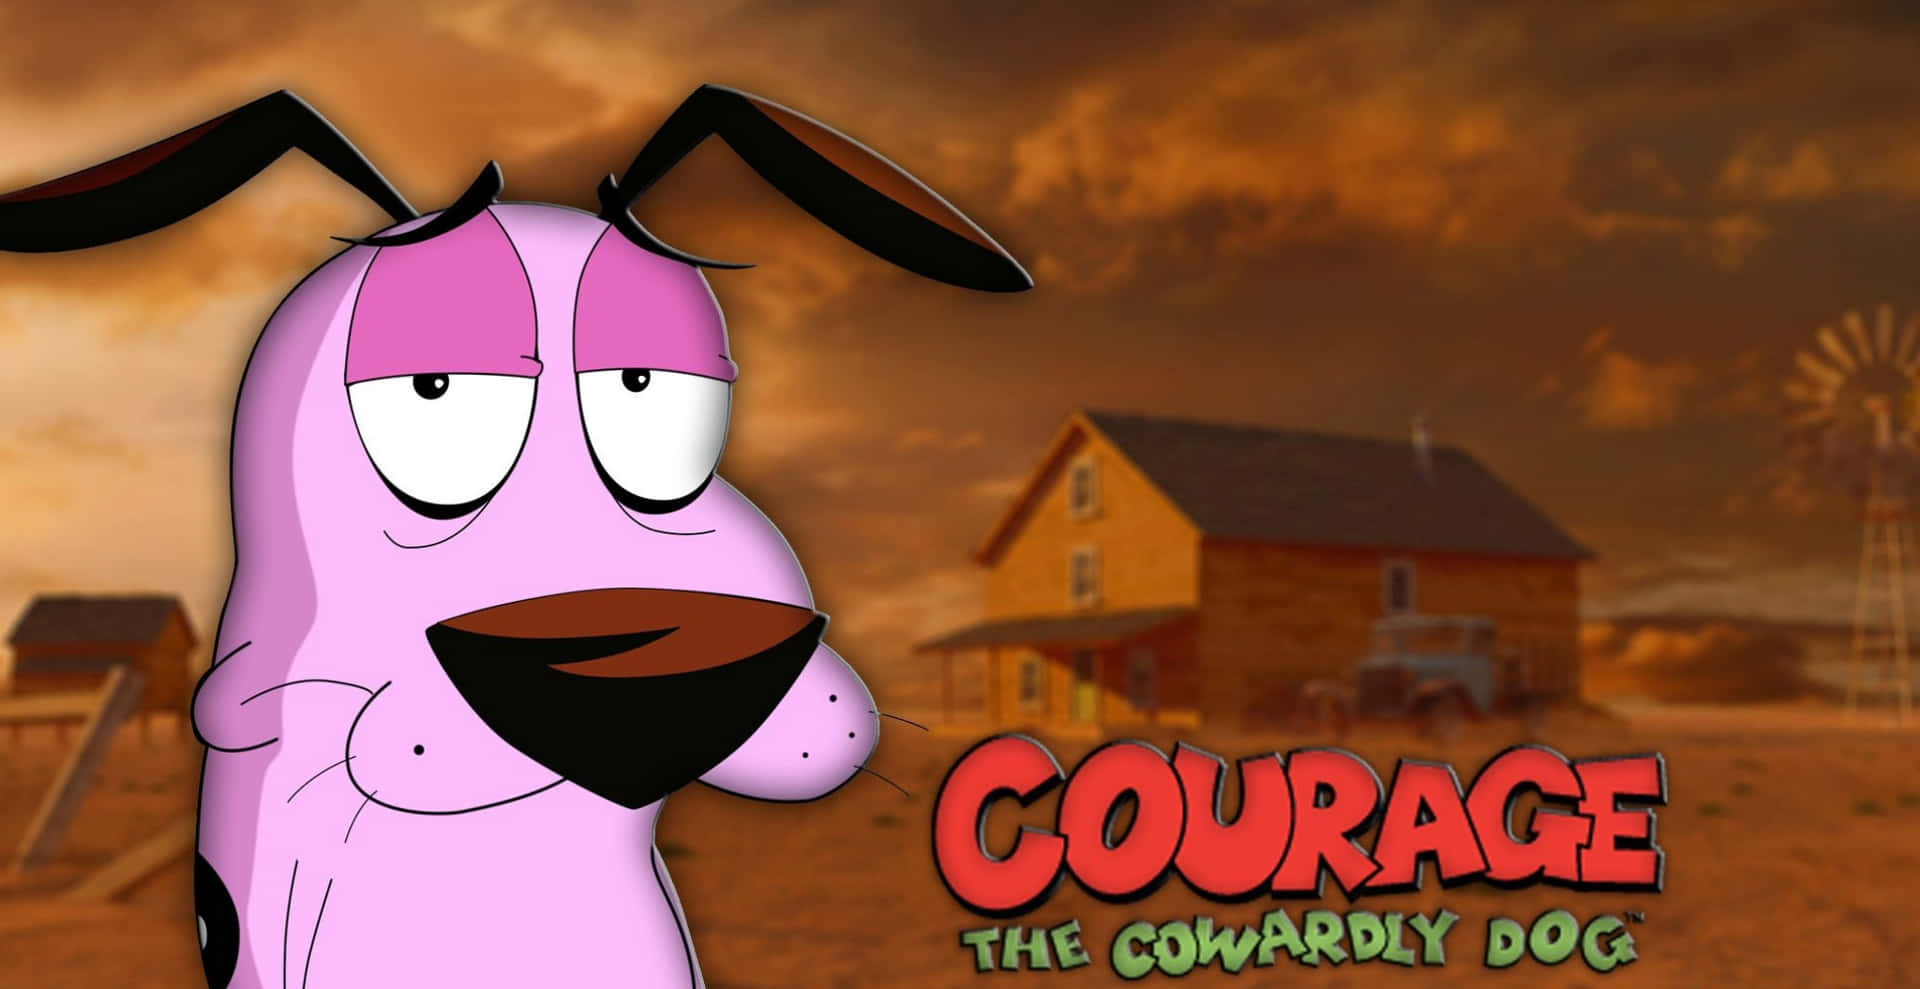 Join Courage In His Hilarious Misadventures